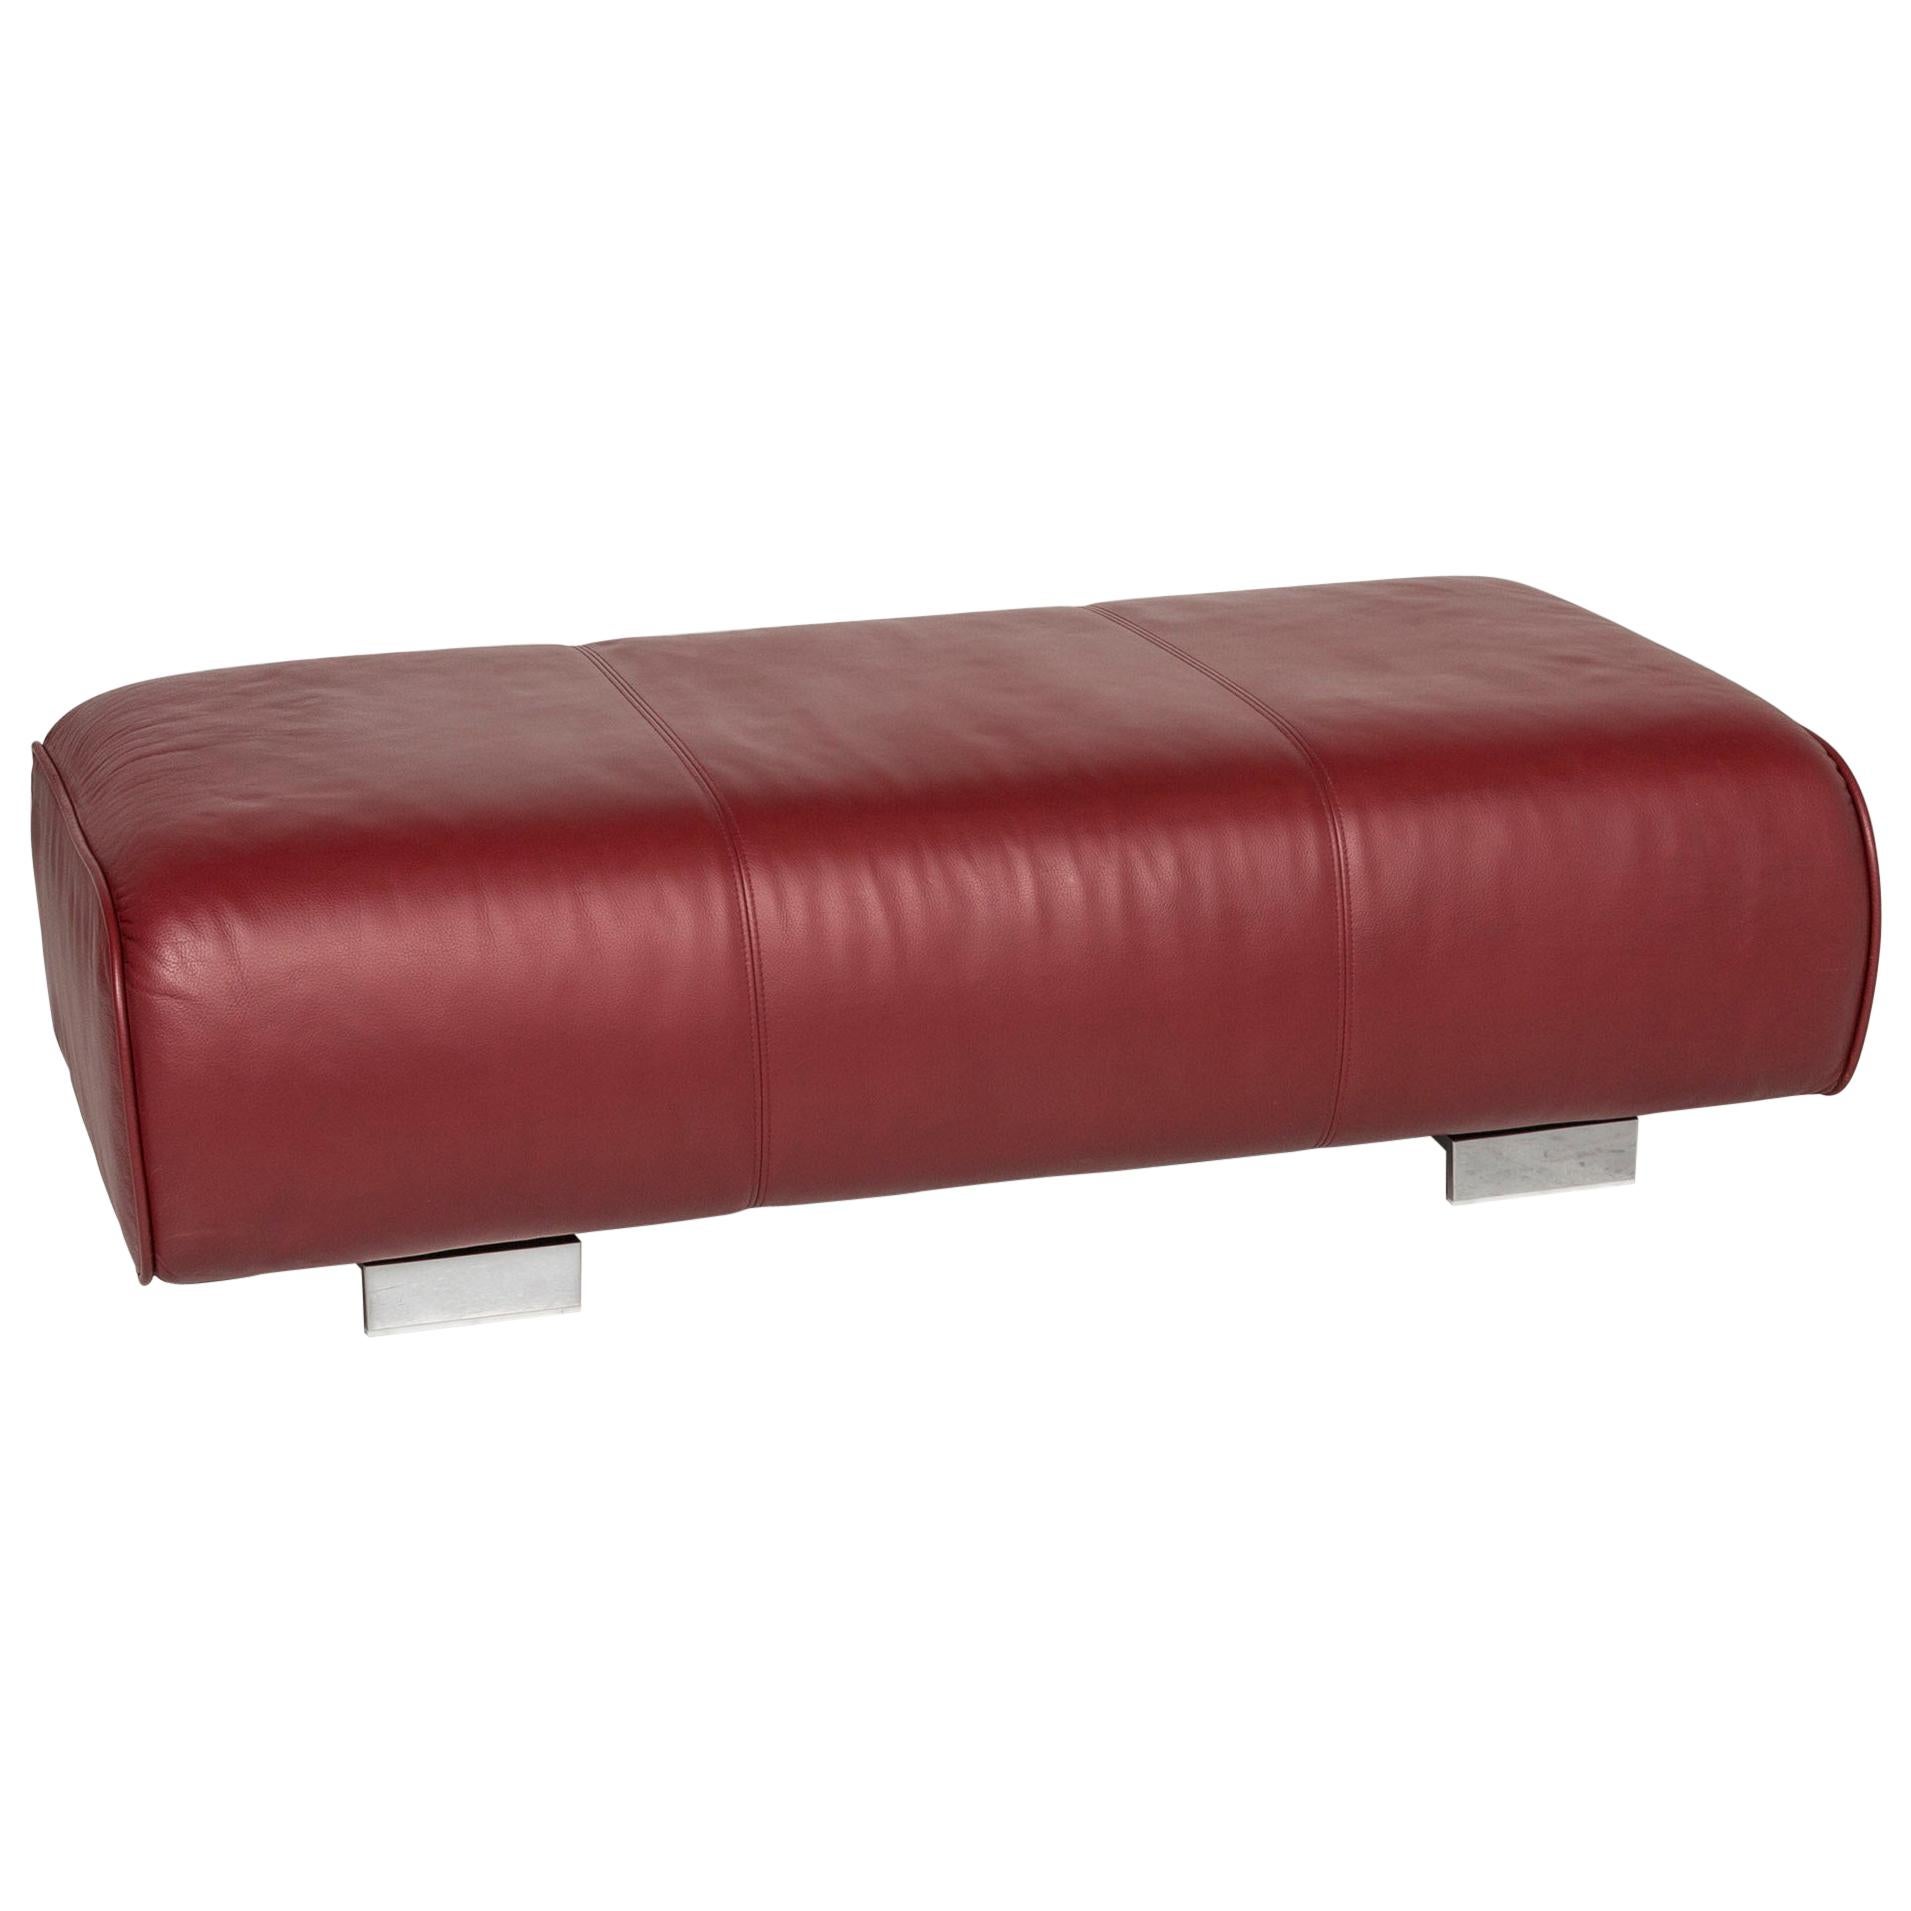 Rolf Benz Leather Ottoman Red For Sale